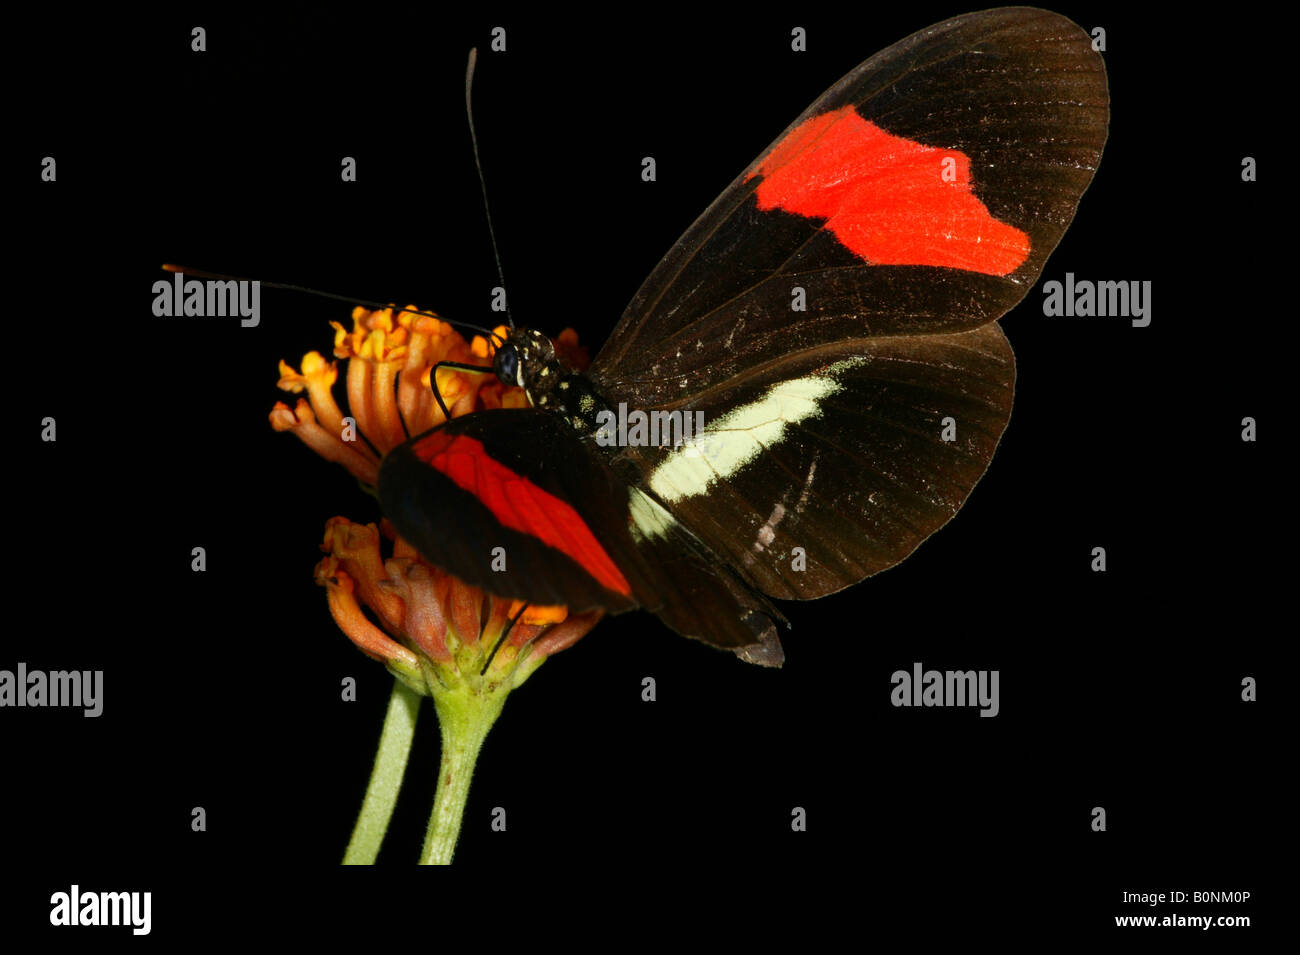 The beautiful butterfly, The Postman, Heliconius erato petiverana, in the 265 hectares rainforest of Metropolitan park, Republic of Panama. Stock Photo